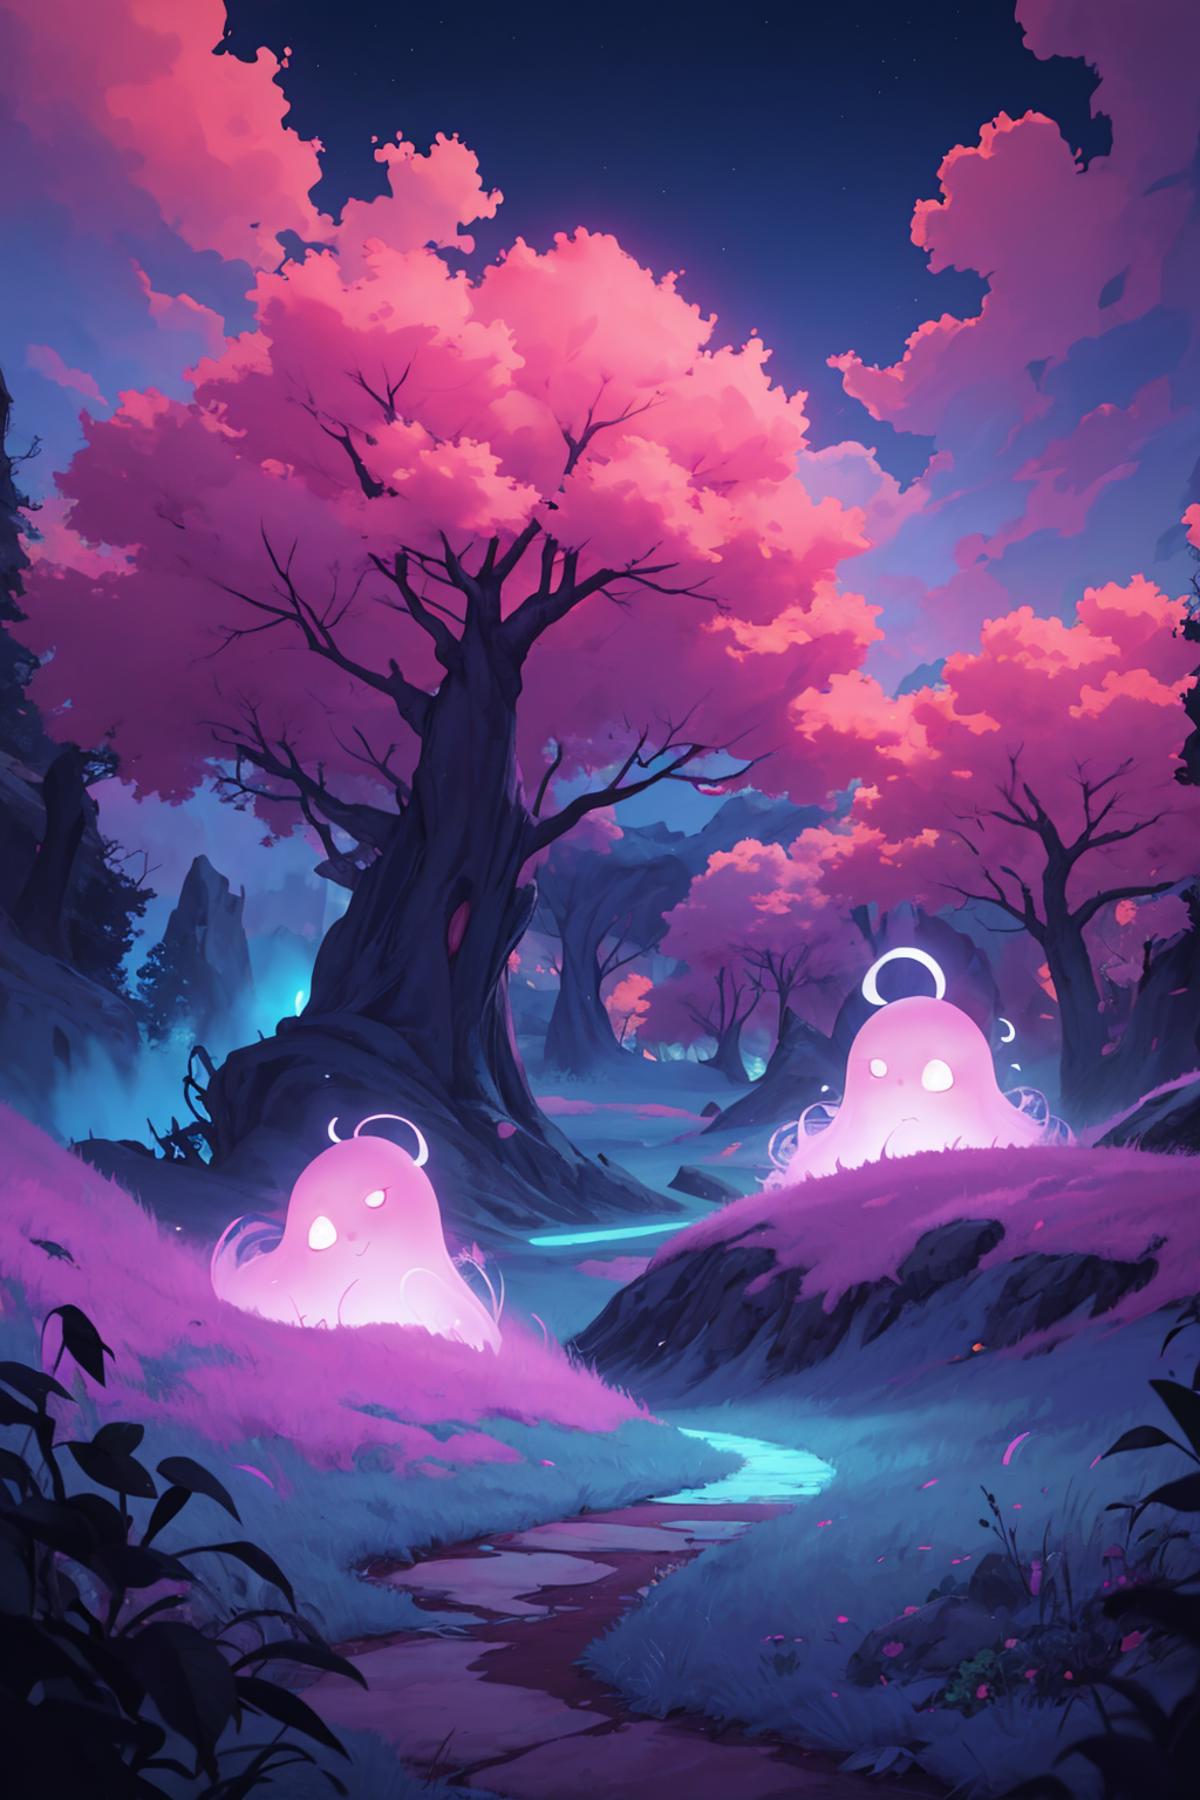 A purple forest with glowing ghostly creatures in the trees.